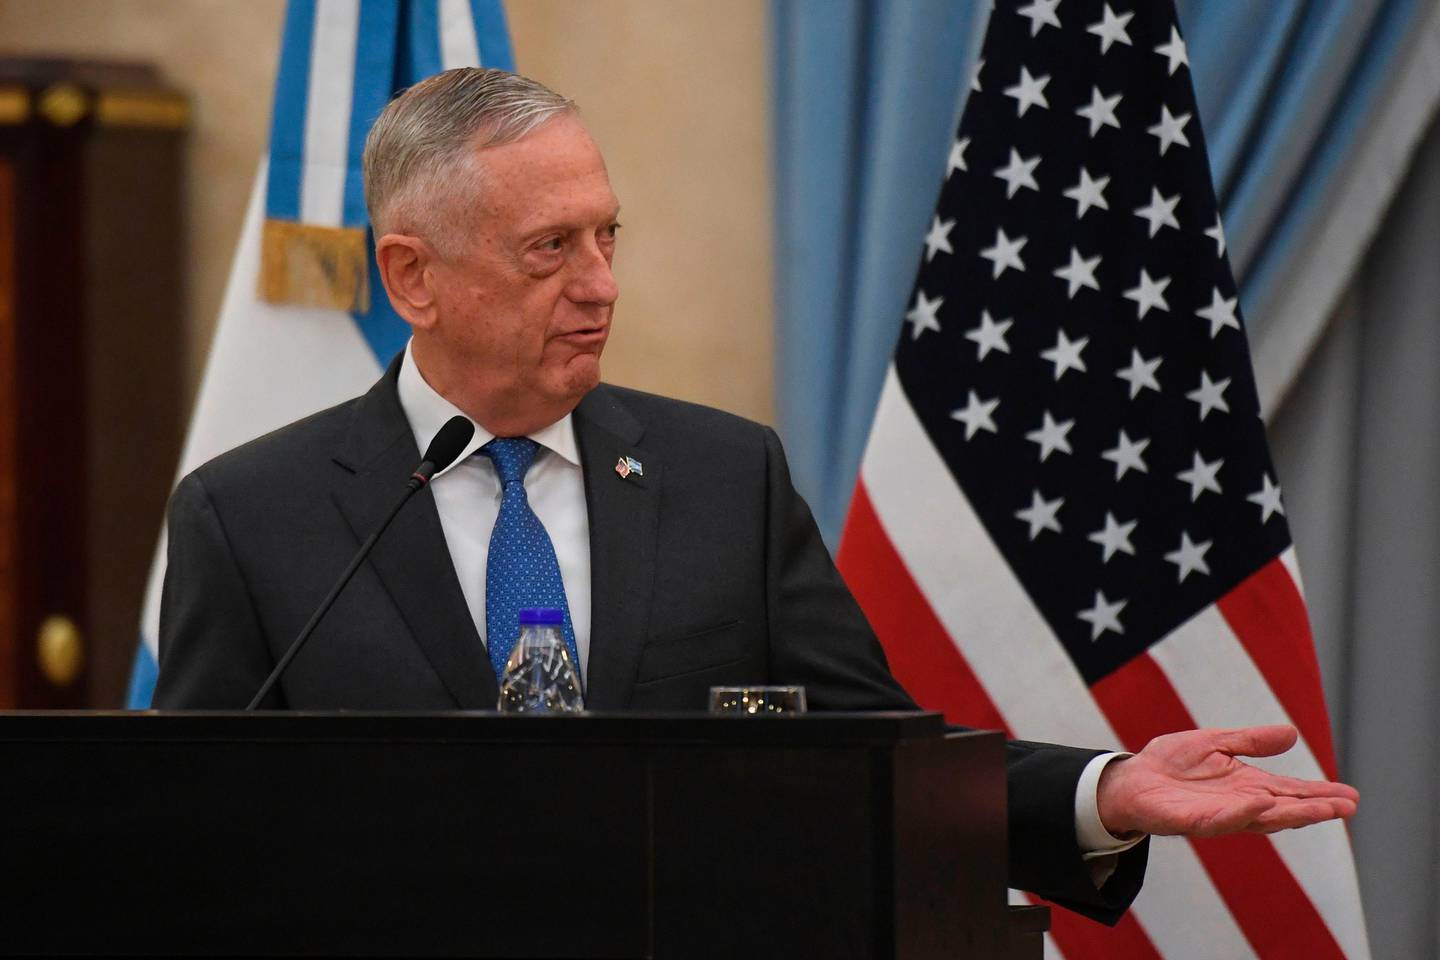 US Defence Secretary Jim Mattis speaks during a press conference offered along with Argentina's Defence Minister Oscar Aguad at the Defence Ministry in Buenos Aires, on August 15, 2018. (Photo by Eitan ABRAMOVICH / AFP)